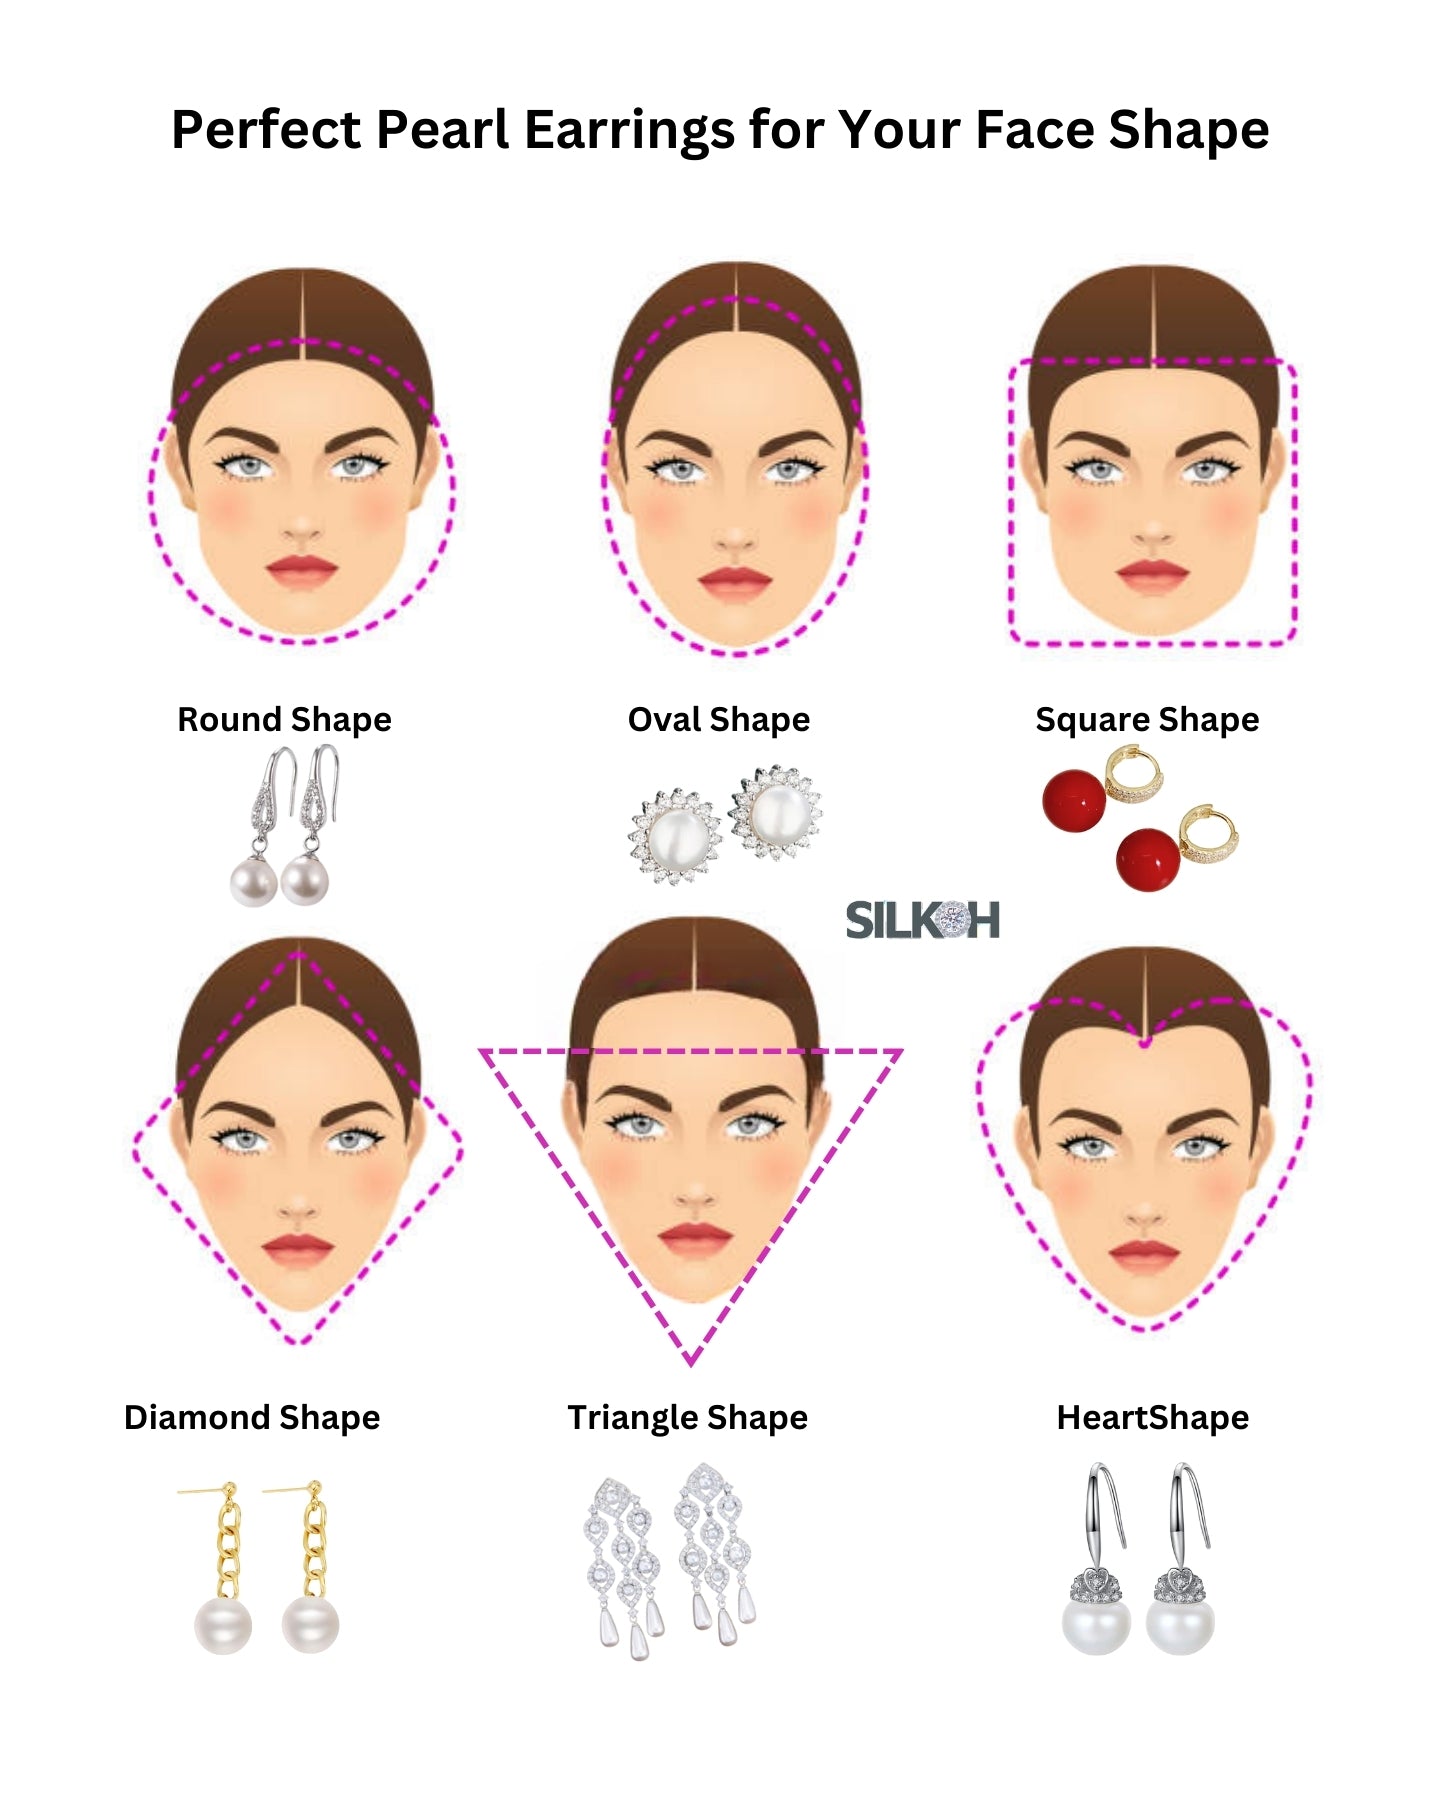 Tips for Picking the Perfect Pearl Earrings for Your Face Shape